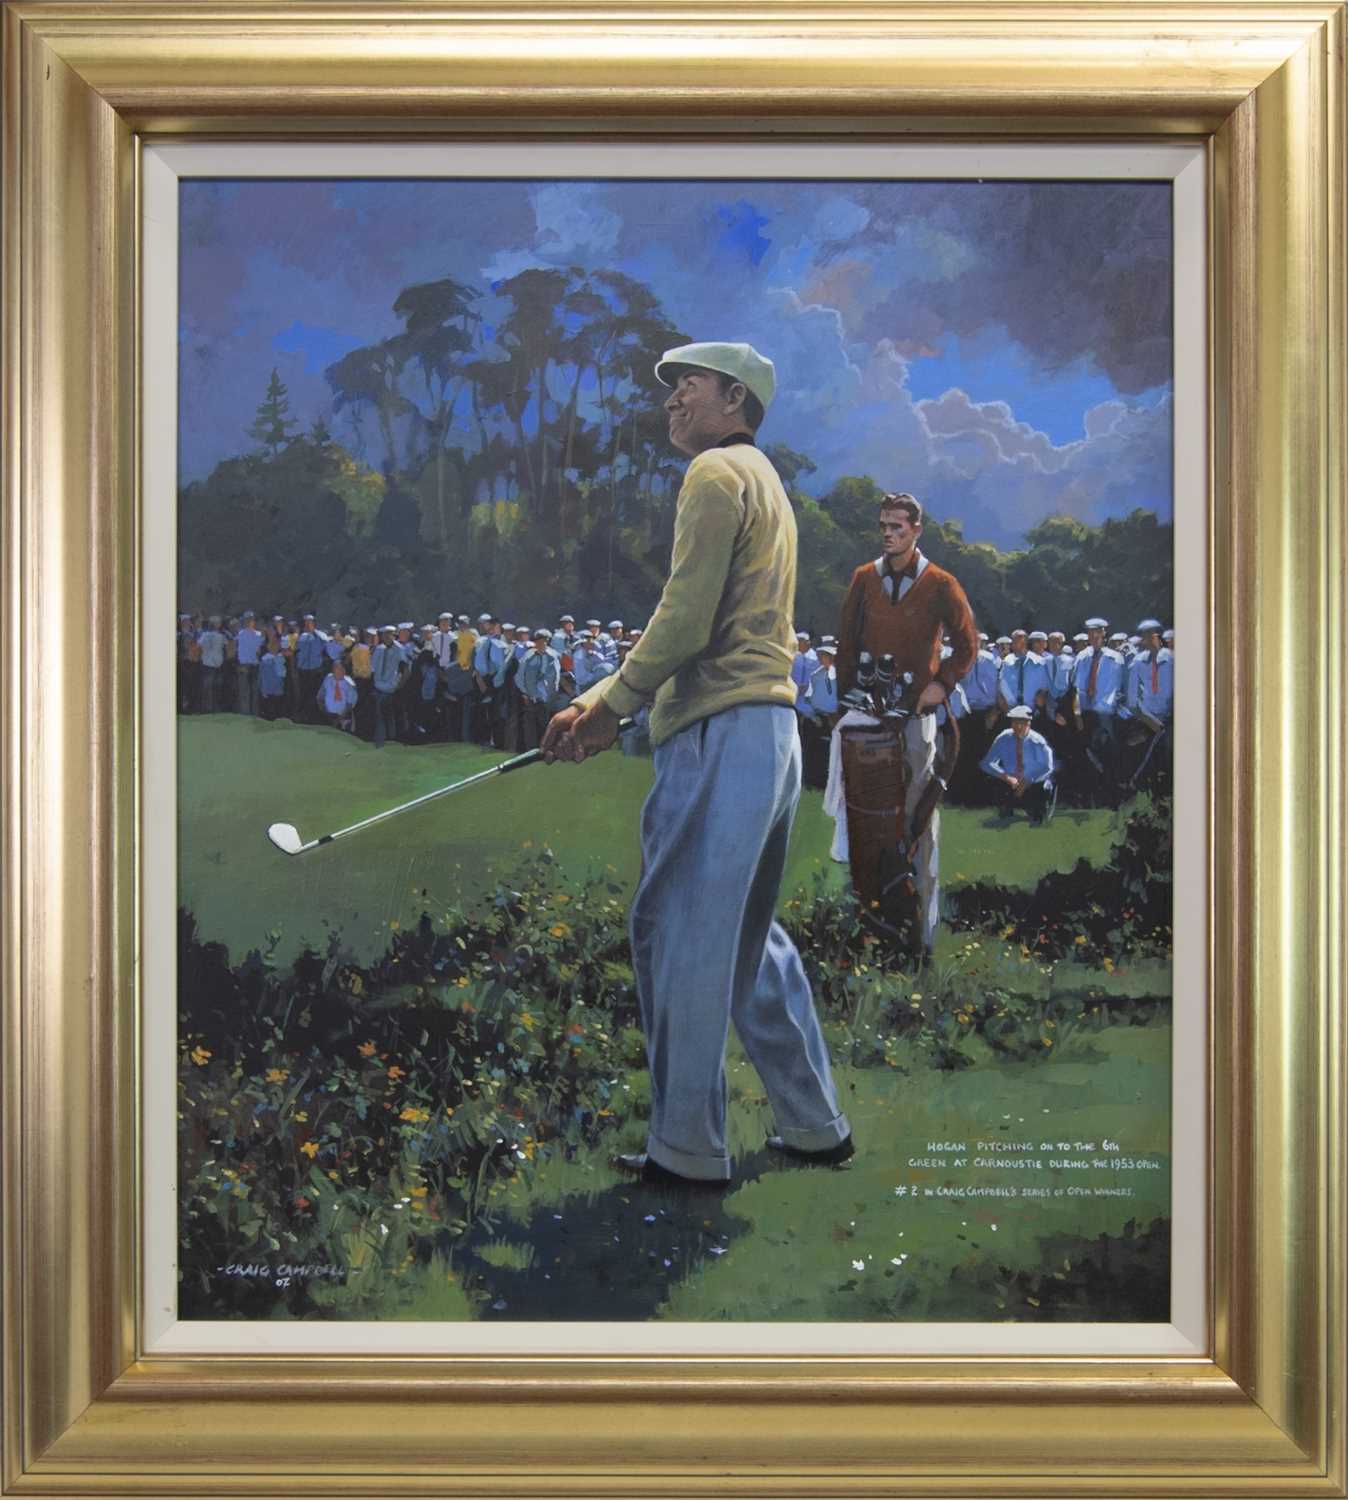 Lot 225 - HOGAN PITCHING TO THE 6TH GREEN AT CARNOUSTIE DURING 1953 OPEN, AN OIL BY CRAIG CAMPBELL